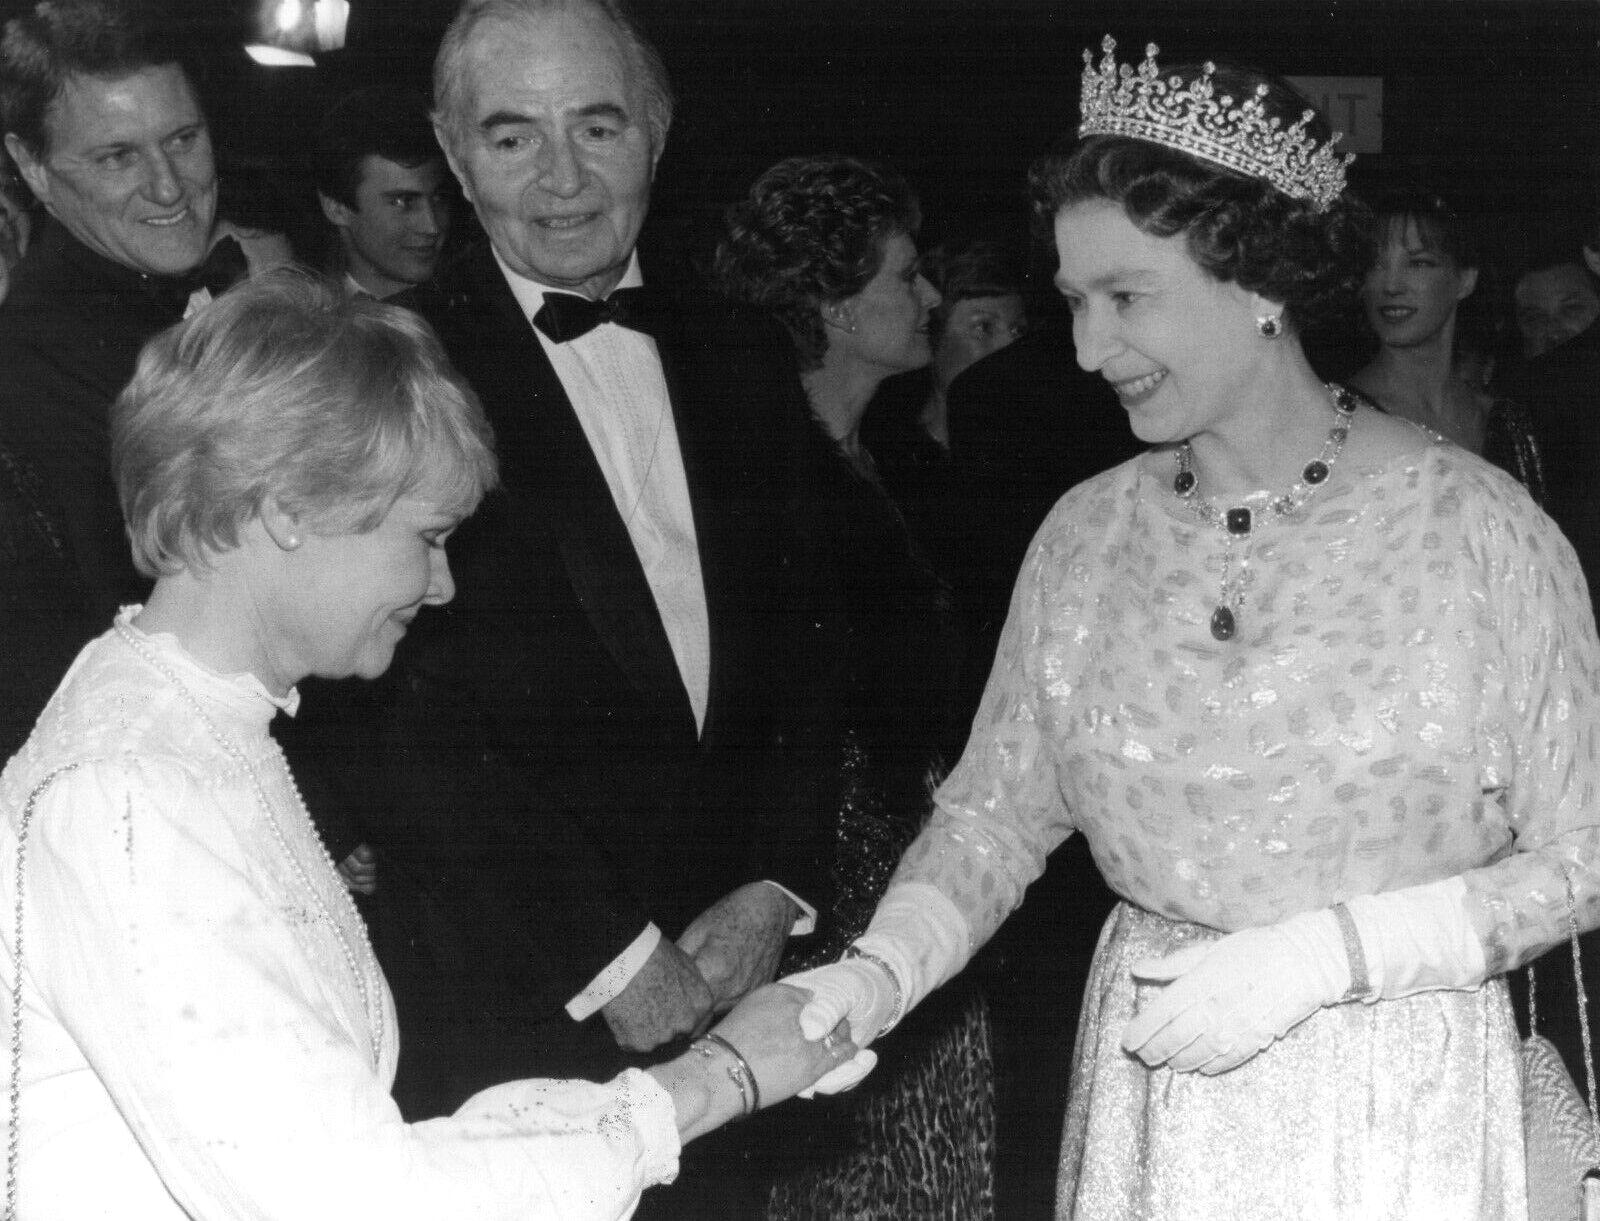 Photograph from Evil Under the Sun (1982) (1) featuring James Mason (as Odell Gardener) and Judi Dench as they meet Queen Elizabeth II at the Royal Premiere